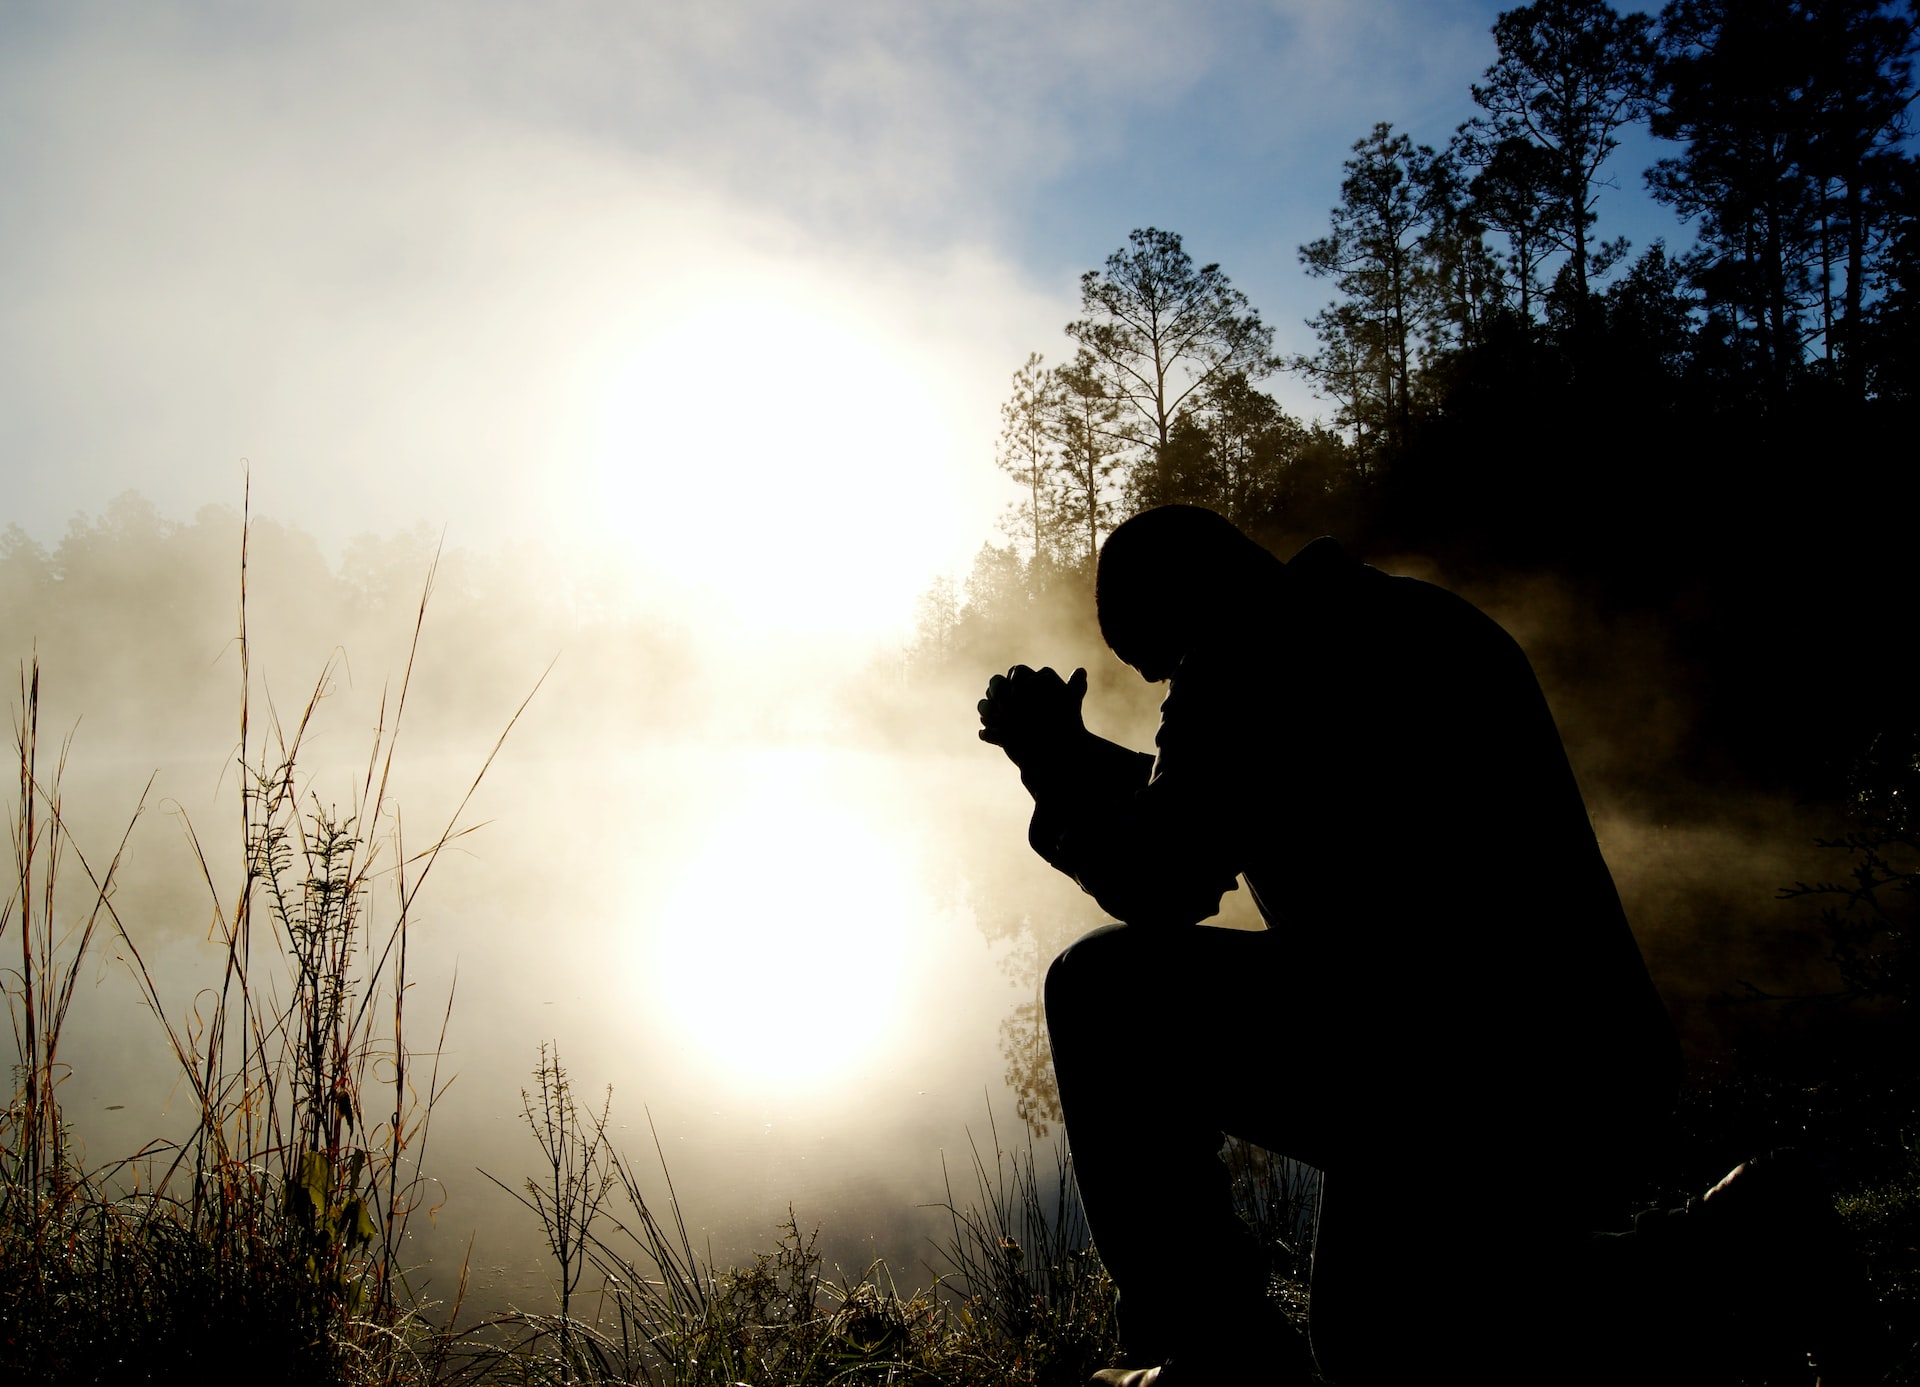 Prayers For A Grieving Family - Helping Relieve Stress Of Those Dealing With Loss